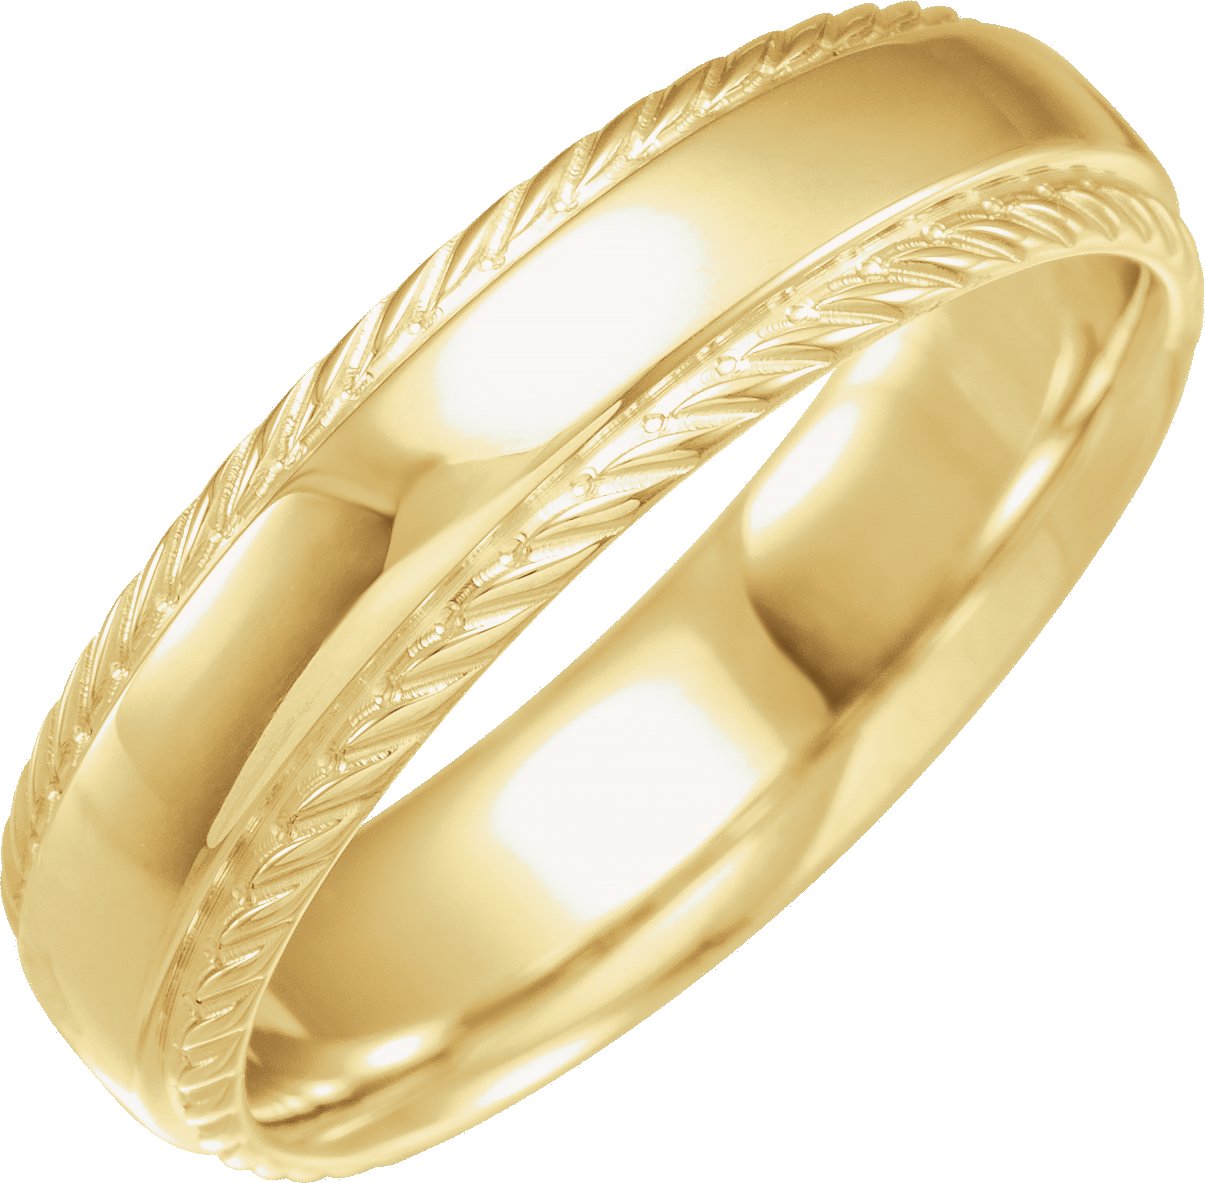 18K Yellow 6 mm Rope Edge Band Size 10.5